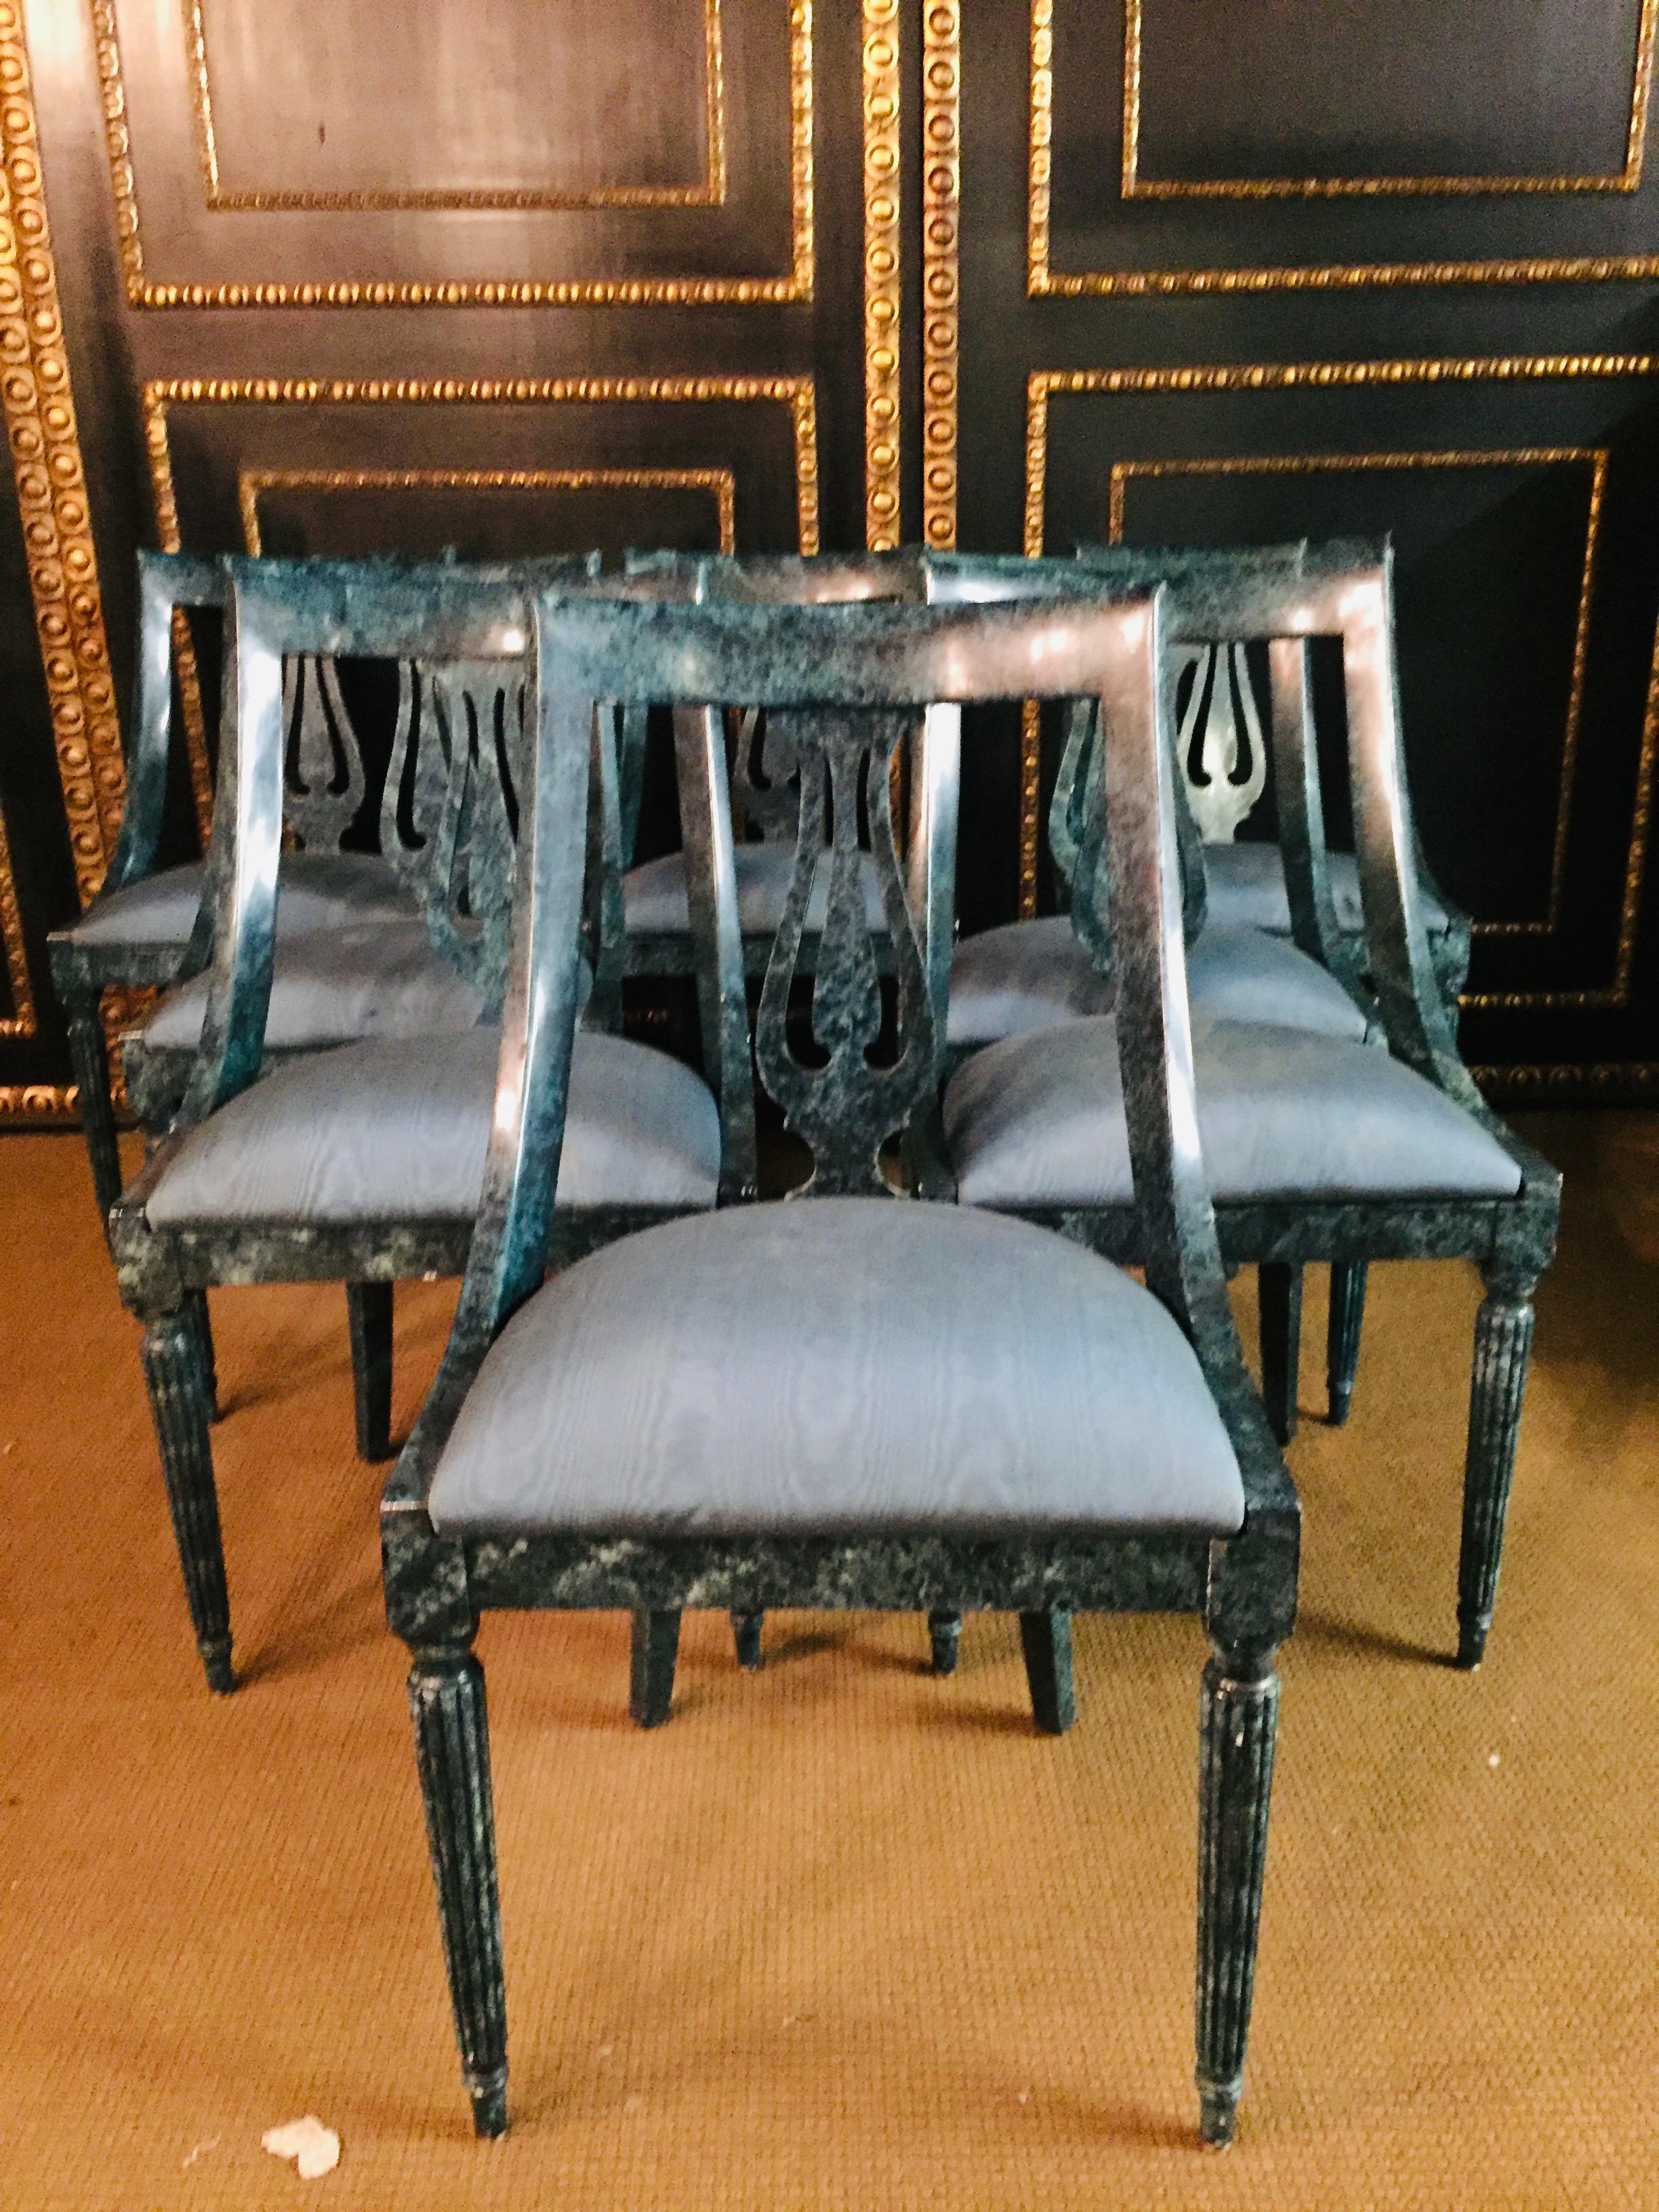 Beech 8 Chairs in the Modern Empire Style Turquoise Marbled